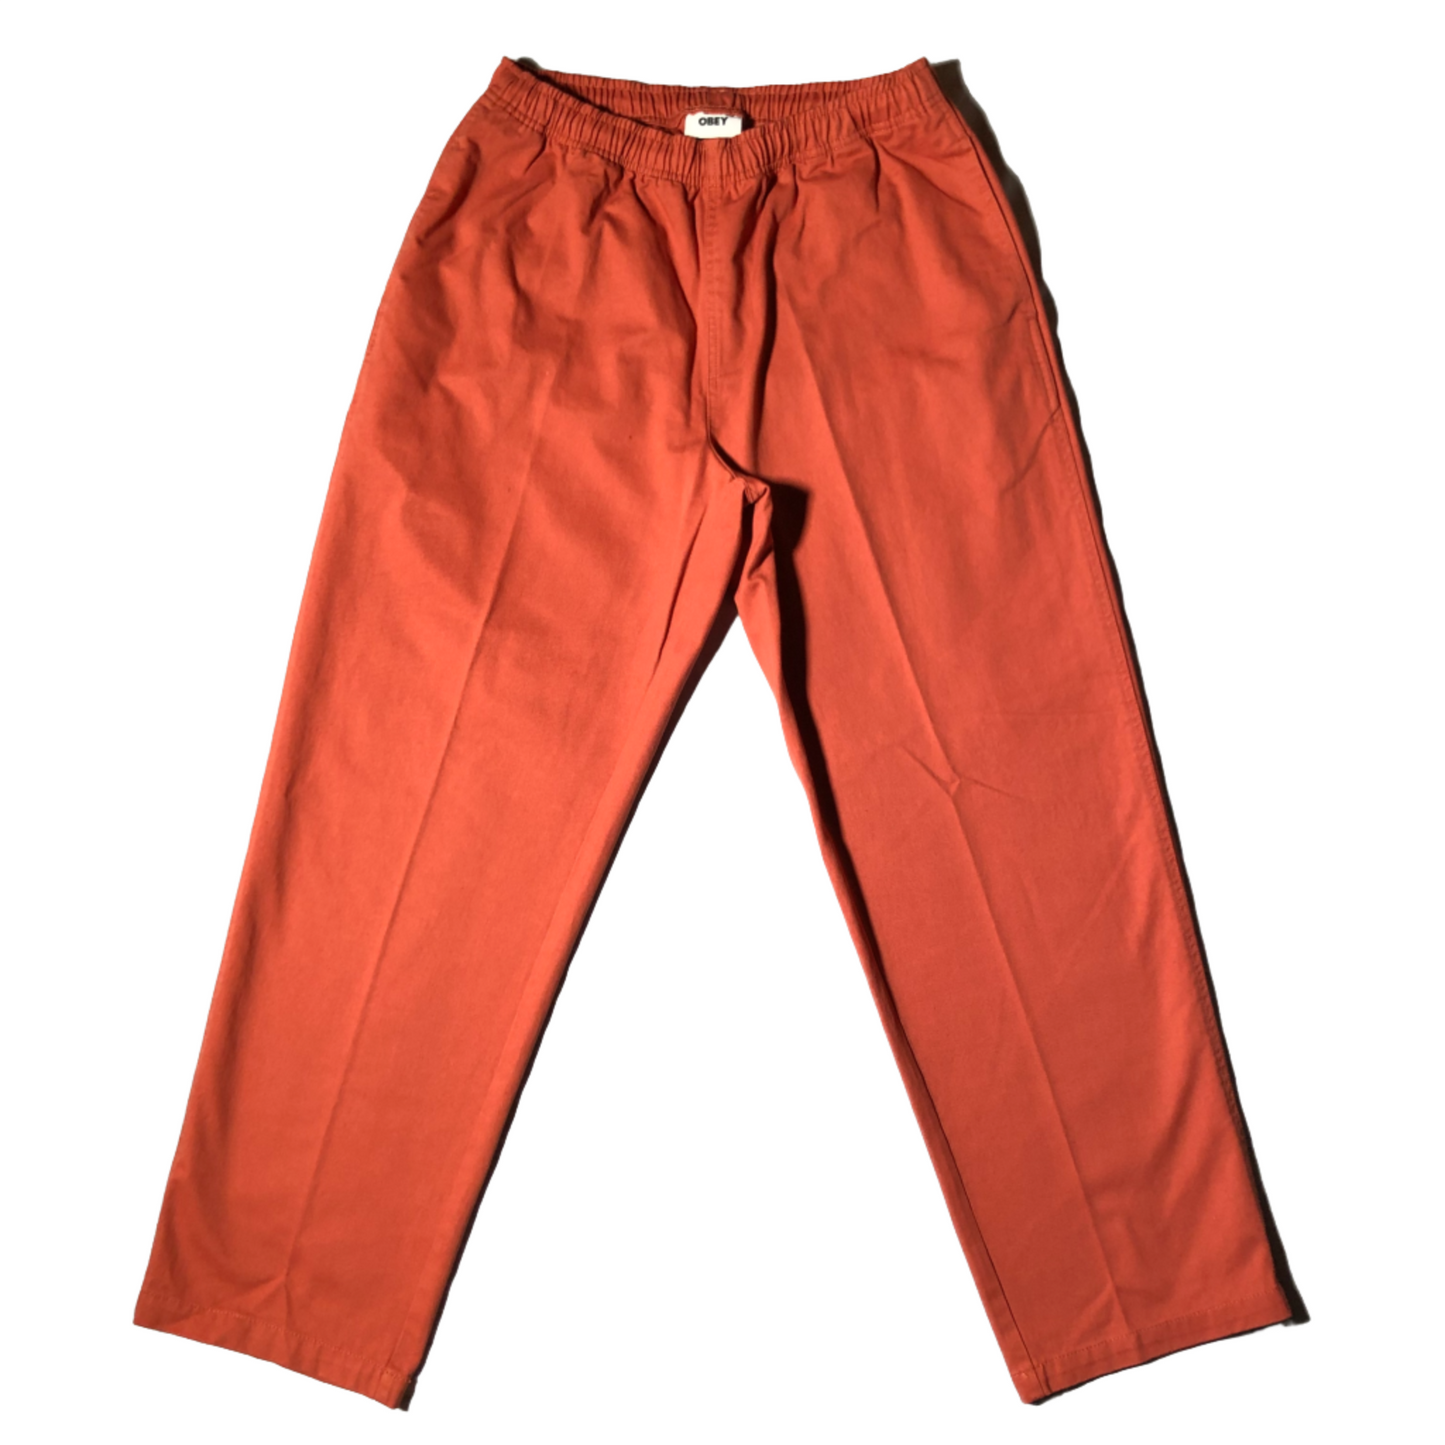 EASY TWILL PANT